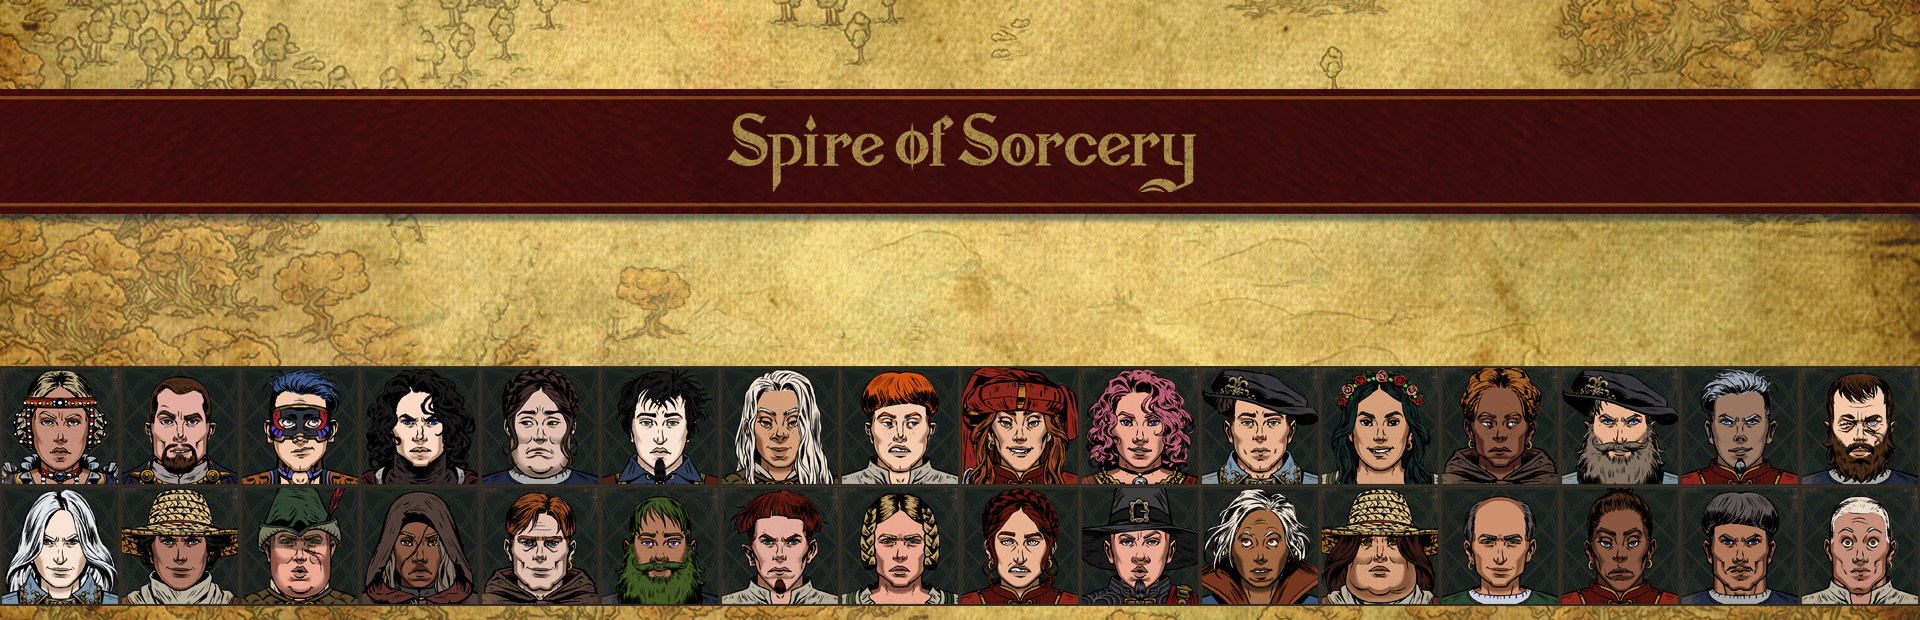 Spire of Sorcery – Character Generator cover image